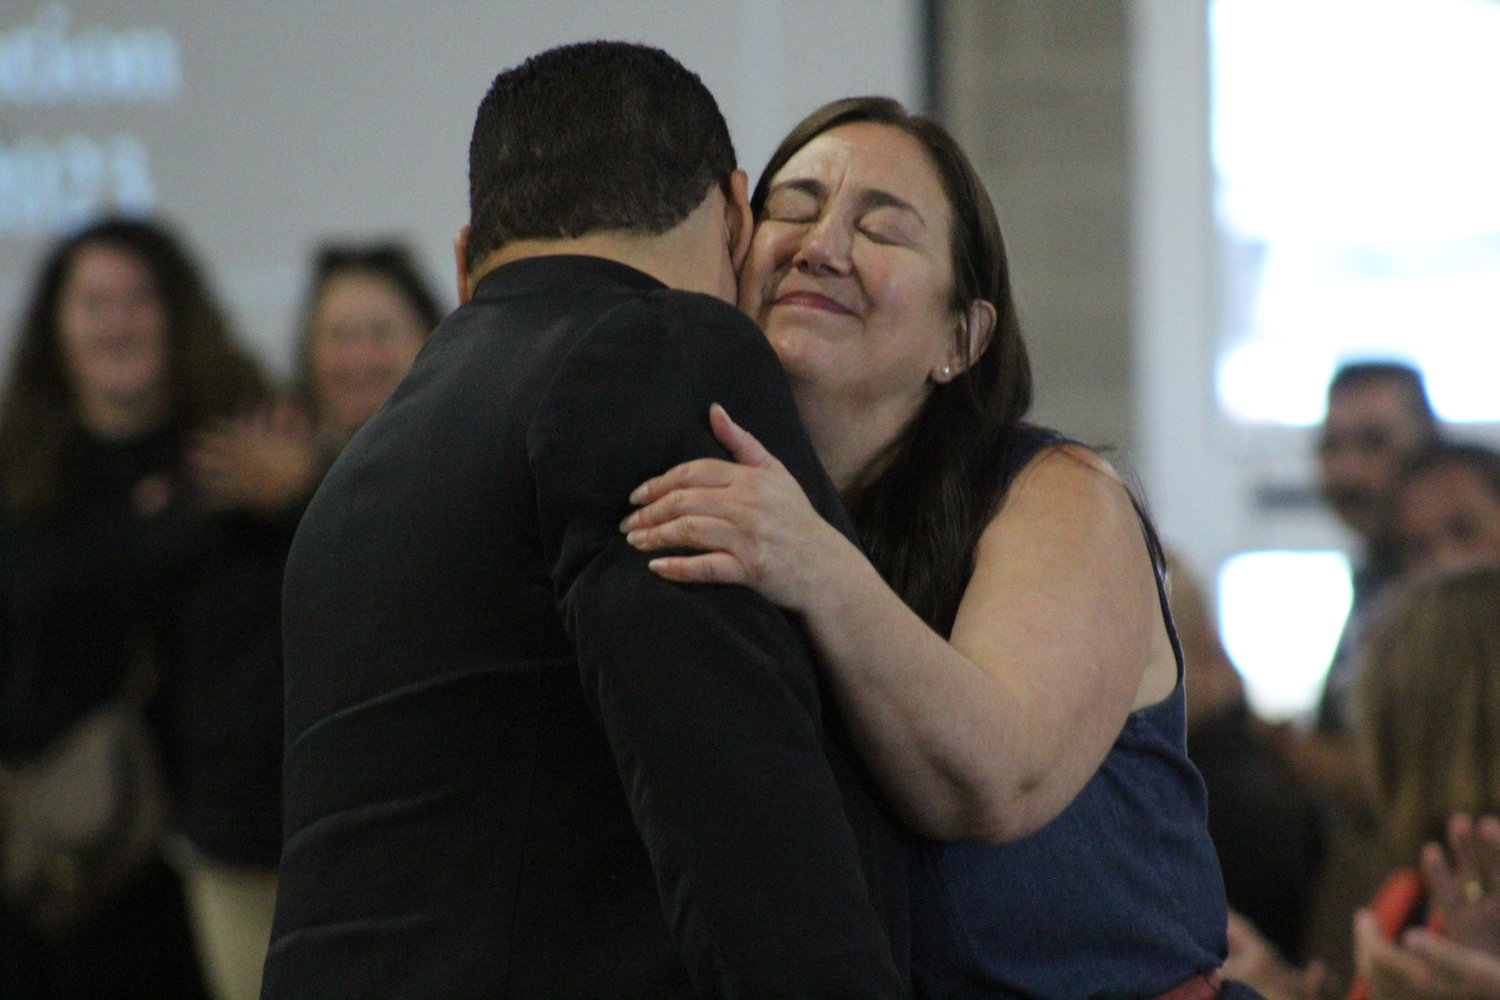 Erin Gruwell hugs GISD Superintendent Elmer Avellaneda after her speech. Gruwell spoke to the GISD teachers and staff the importance of hearing the stories of students.